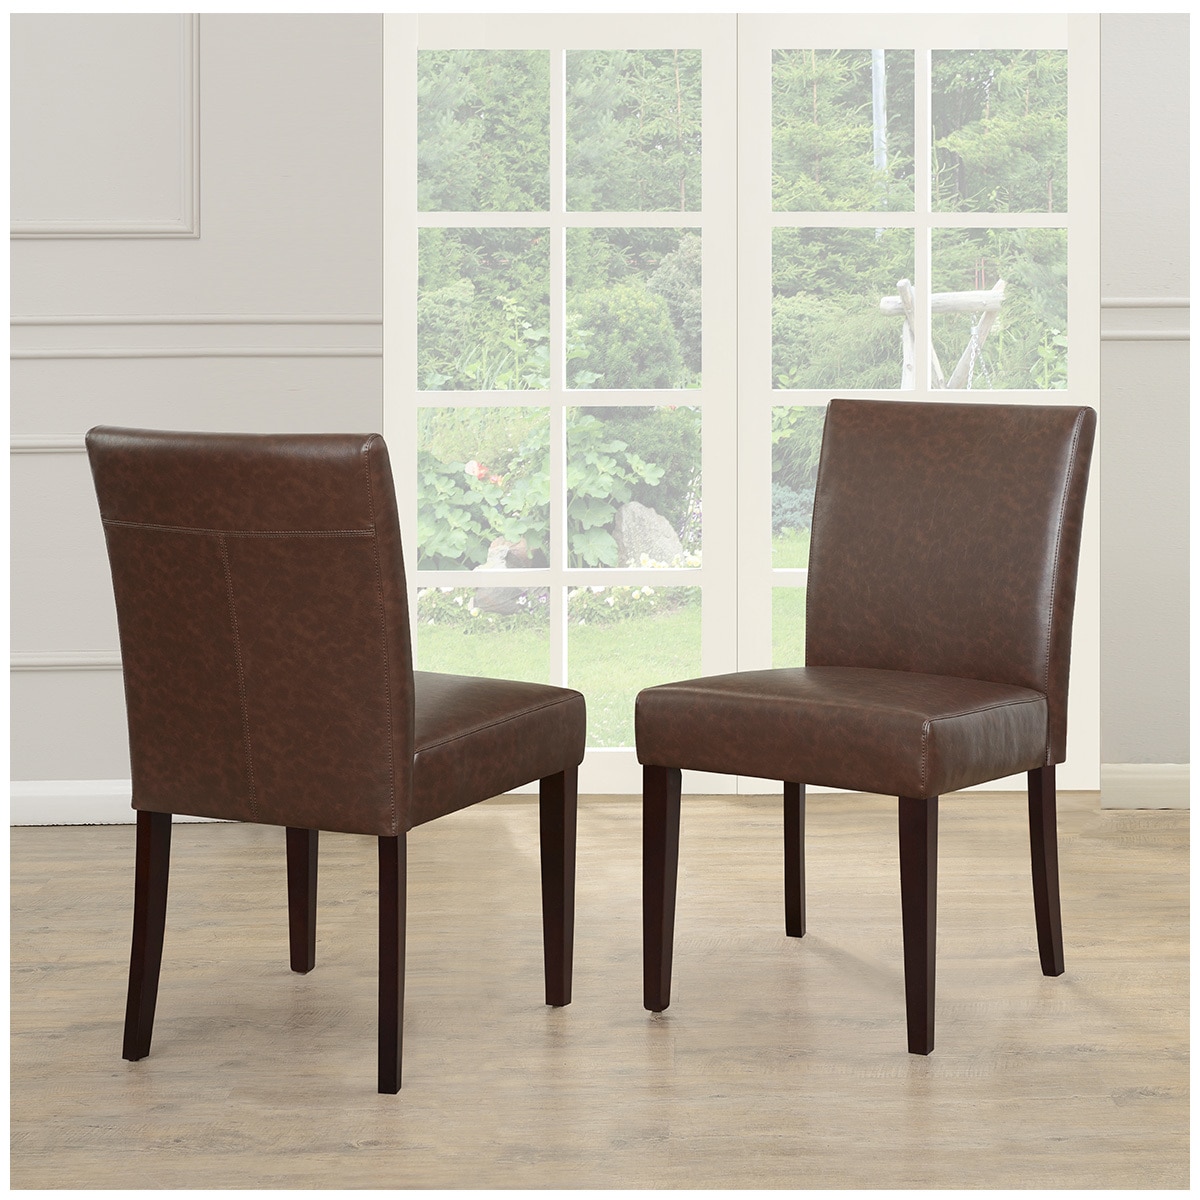 Kuka 2 Pack Brown Bonded Leather Chair